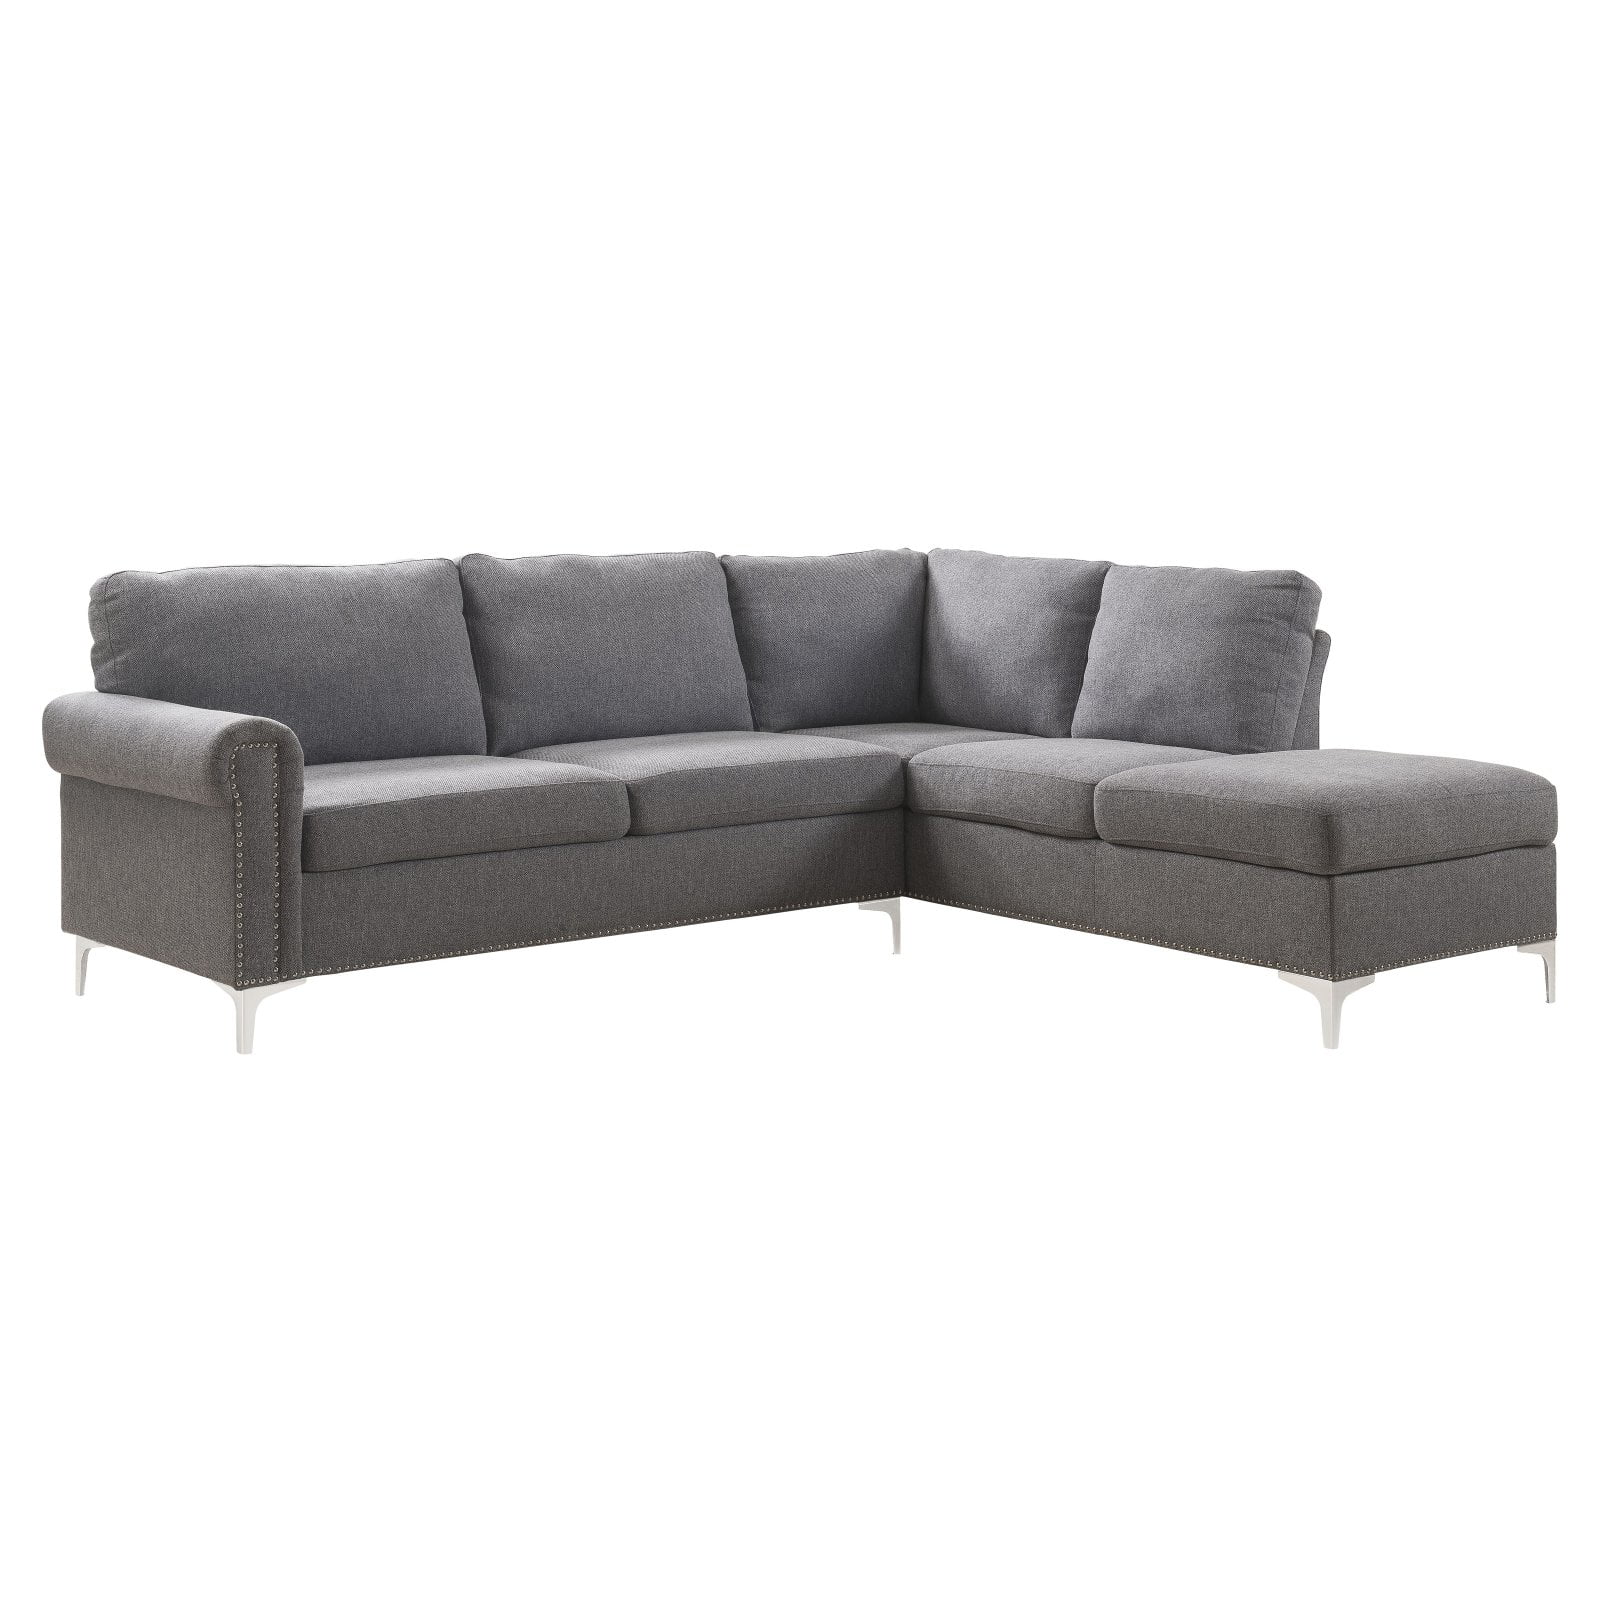 Picture of ACME 52755 Melvyn Sectional Sofa - Gray Fabric - 35 x 99 x 32 in.